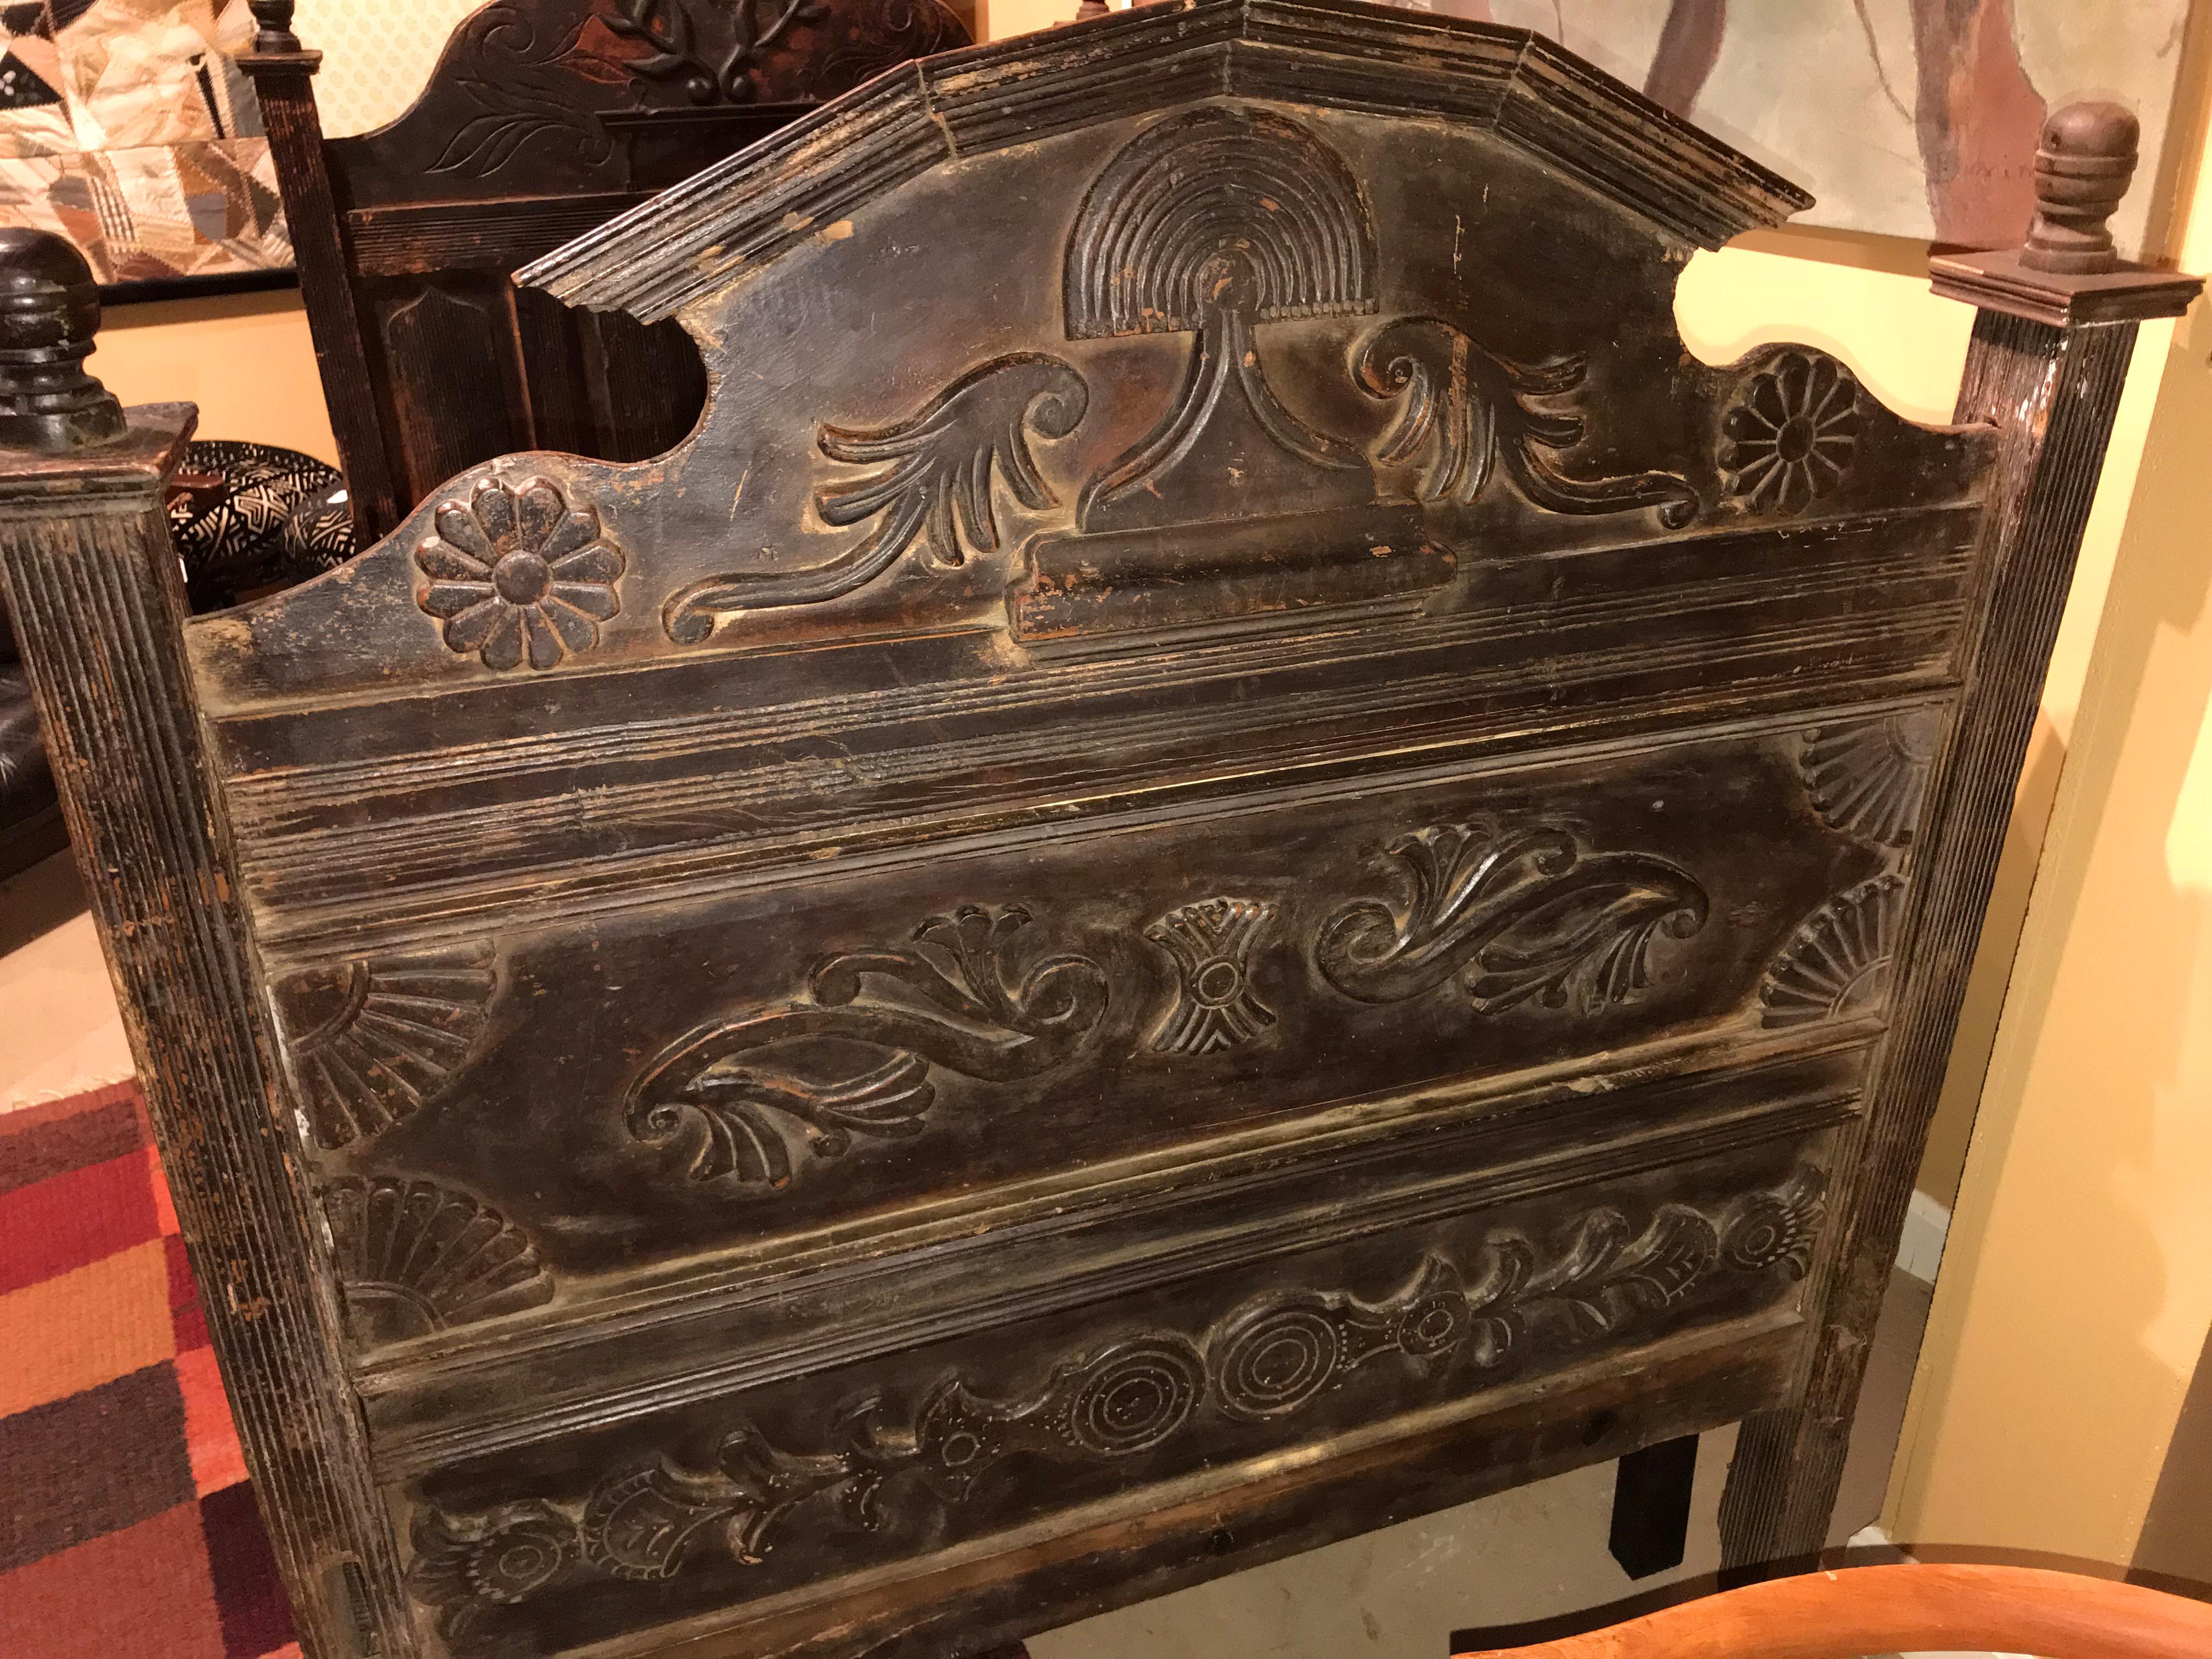 This early 19th century carved wooden bed, probably Guatemalan in origin, features a broken pediment headboard with carved dove and olive branches above small reeded panels, a footboard with decorative architectural fan and foliate carvings and